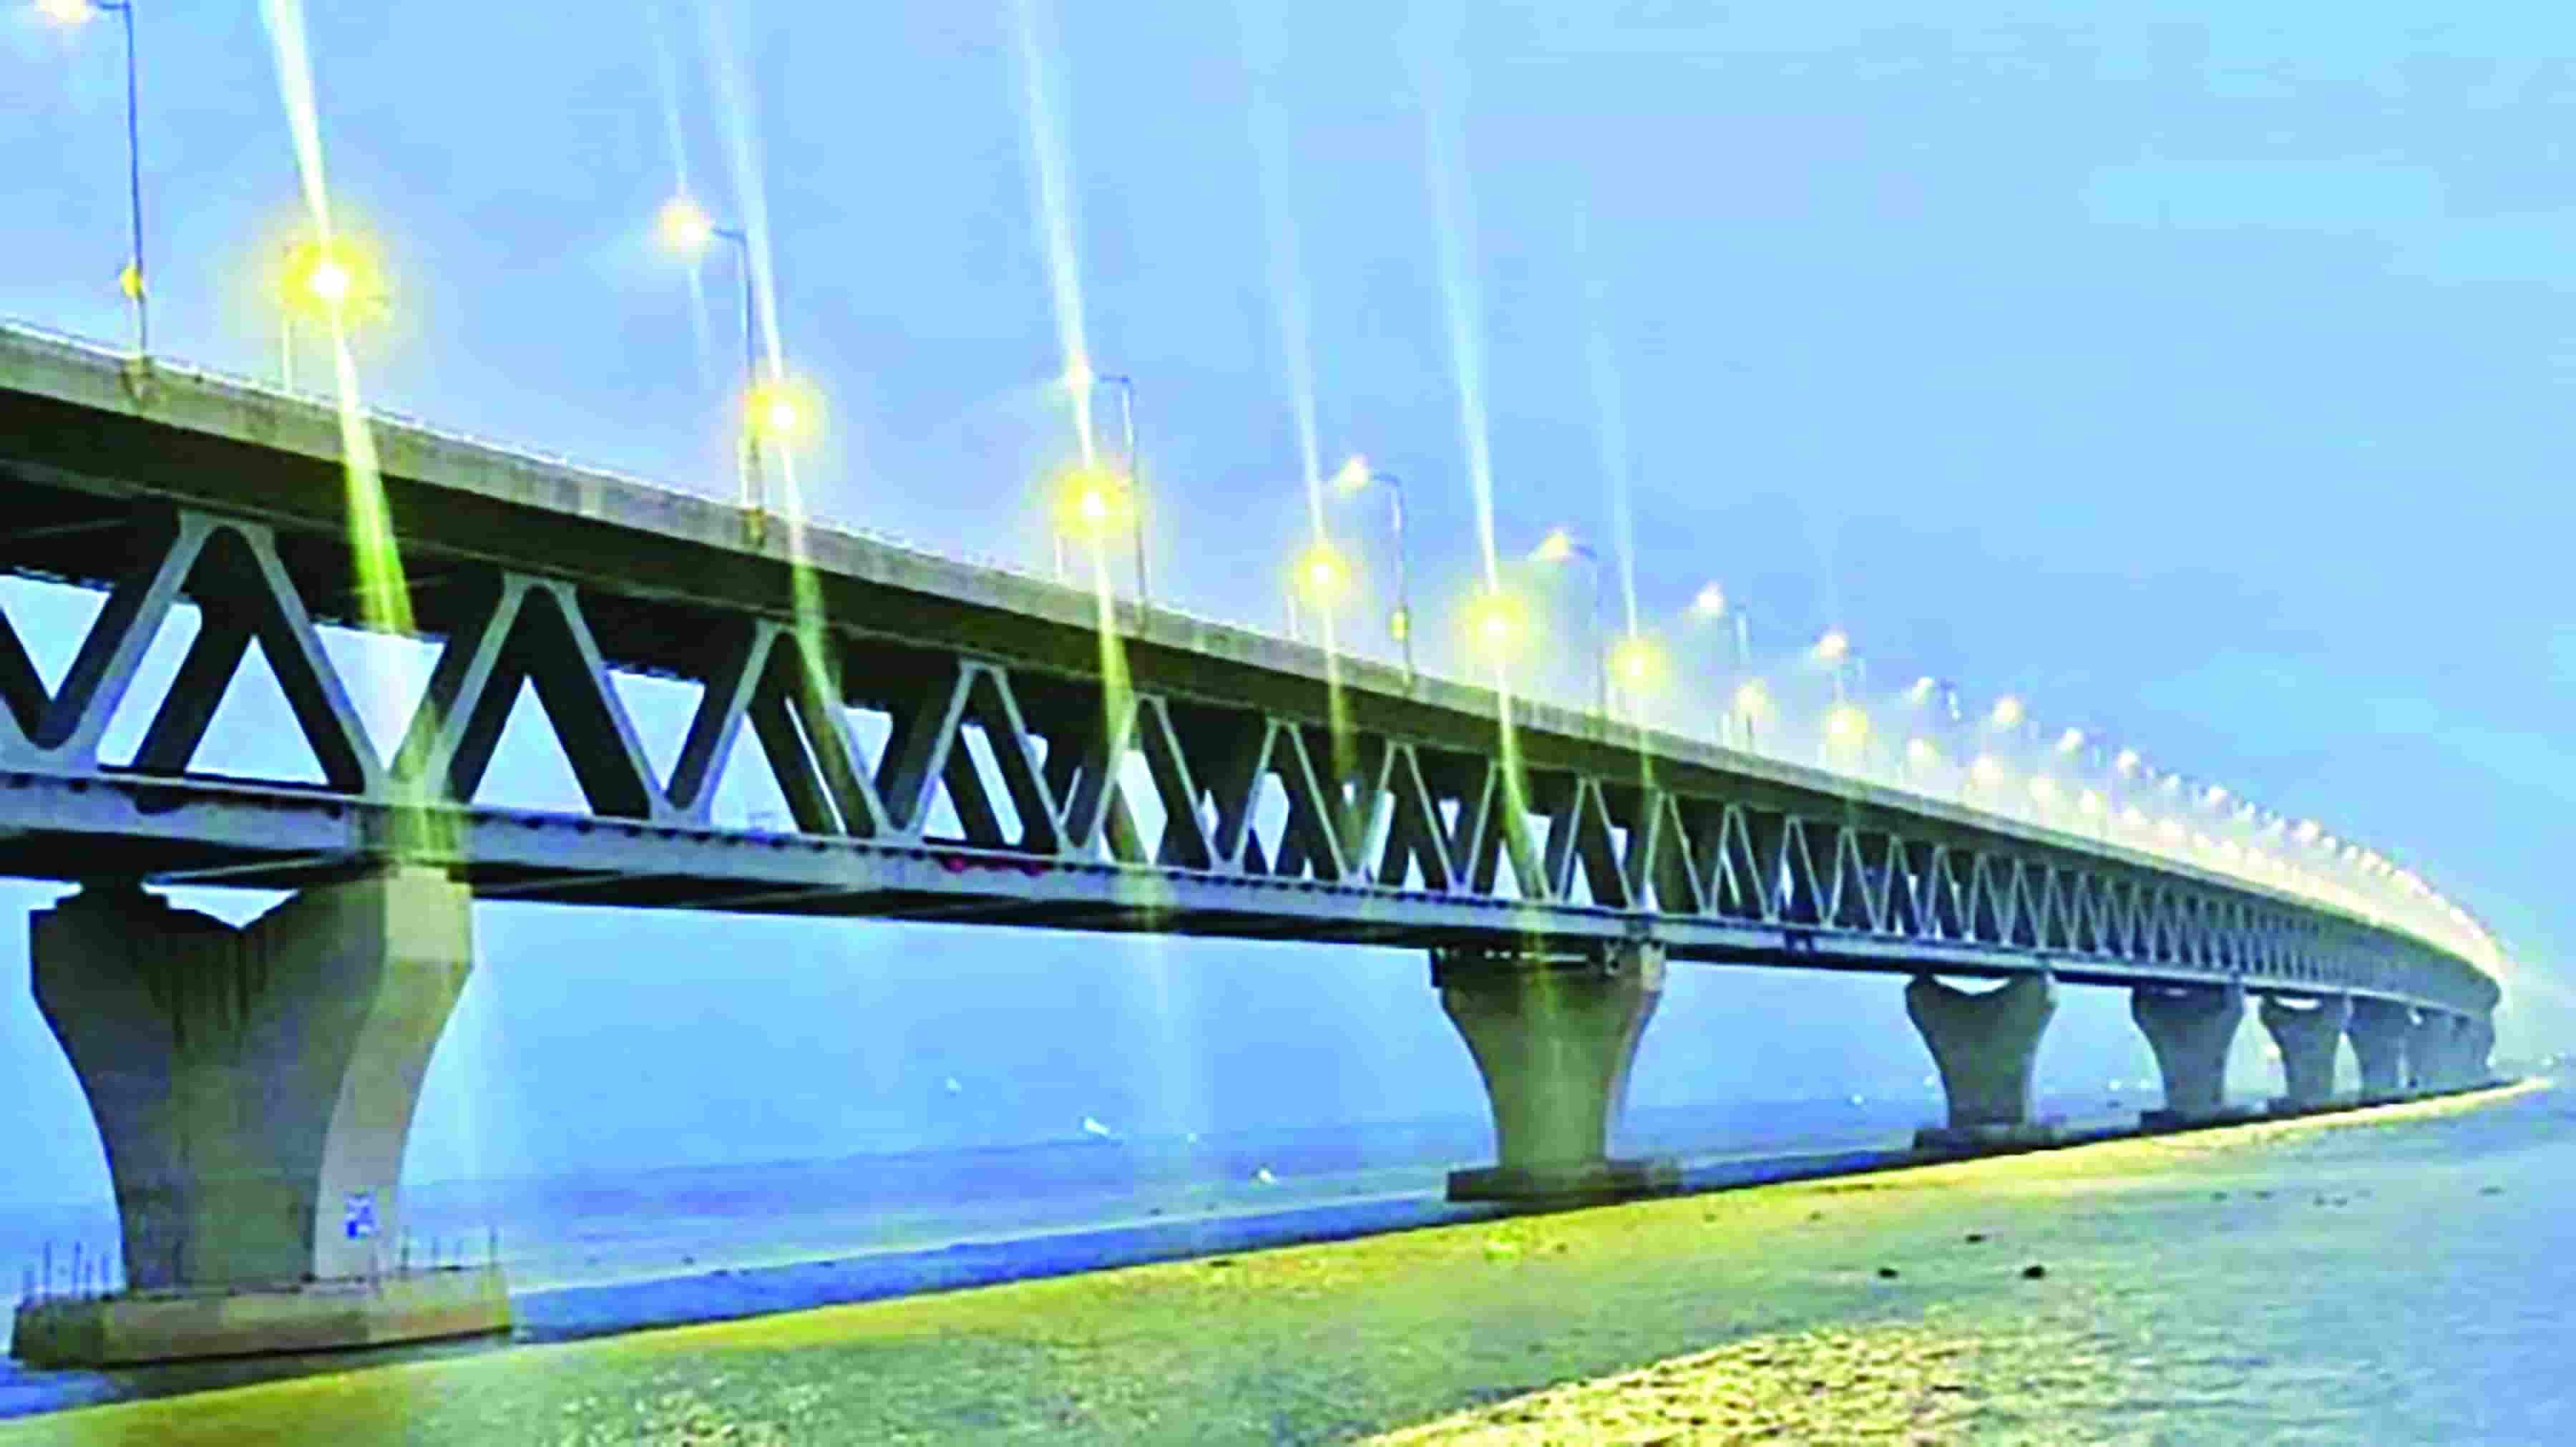 Padma Bridge: Opening up Opportunities for Greater Regional Connectivity